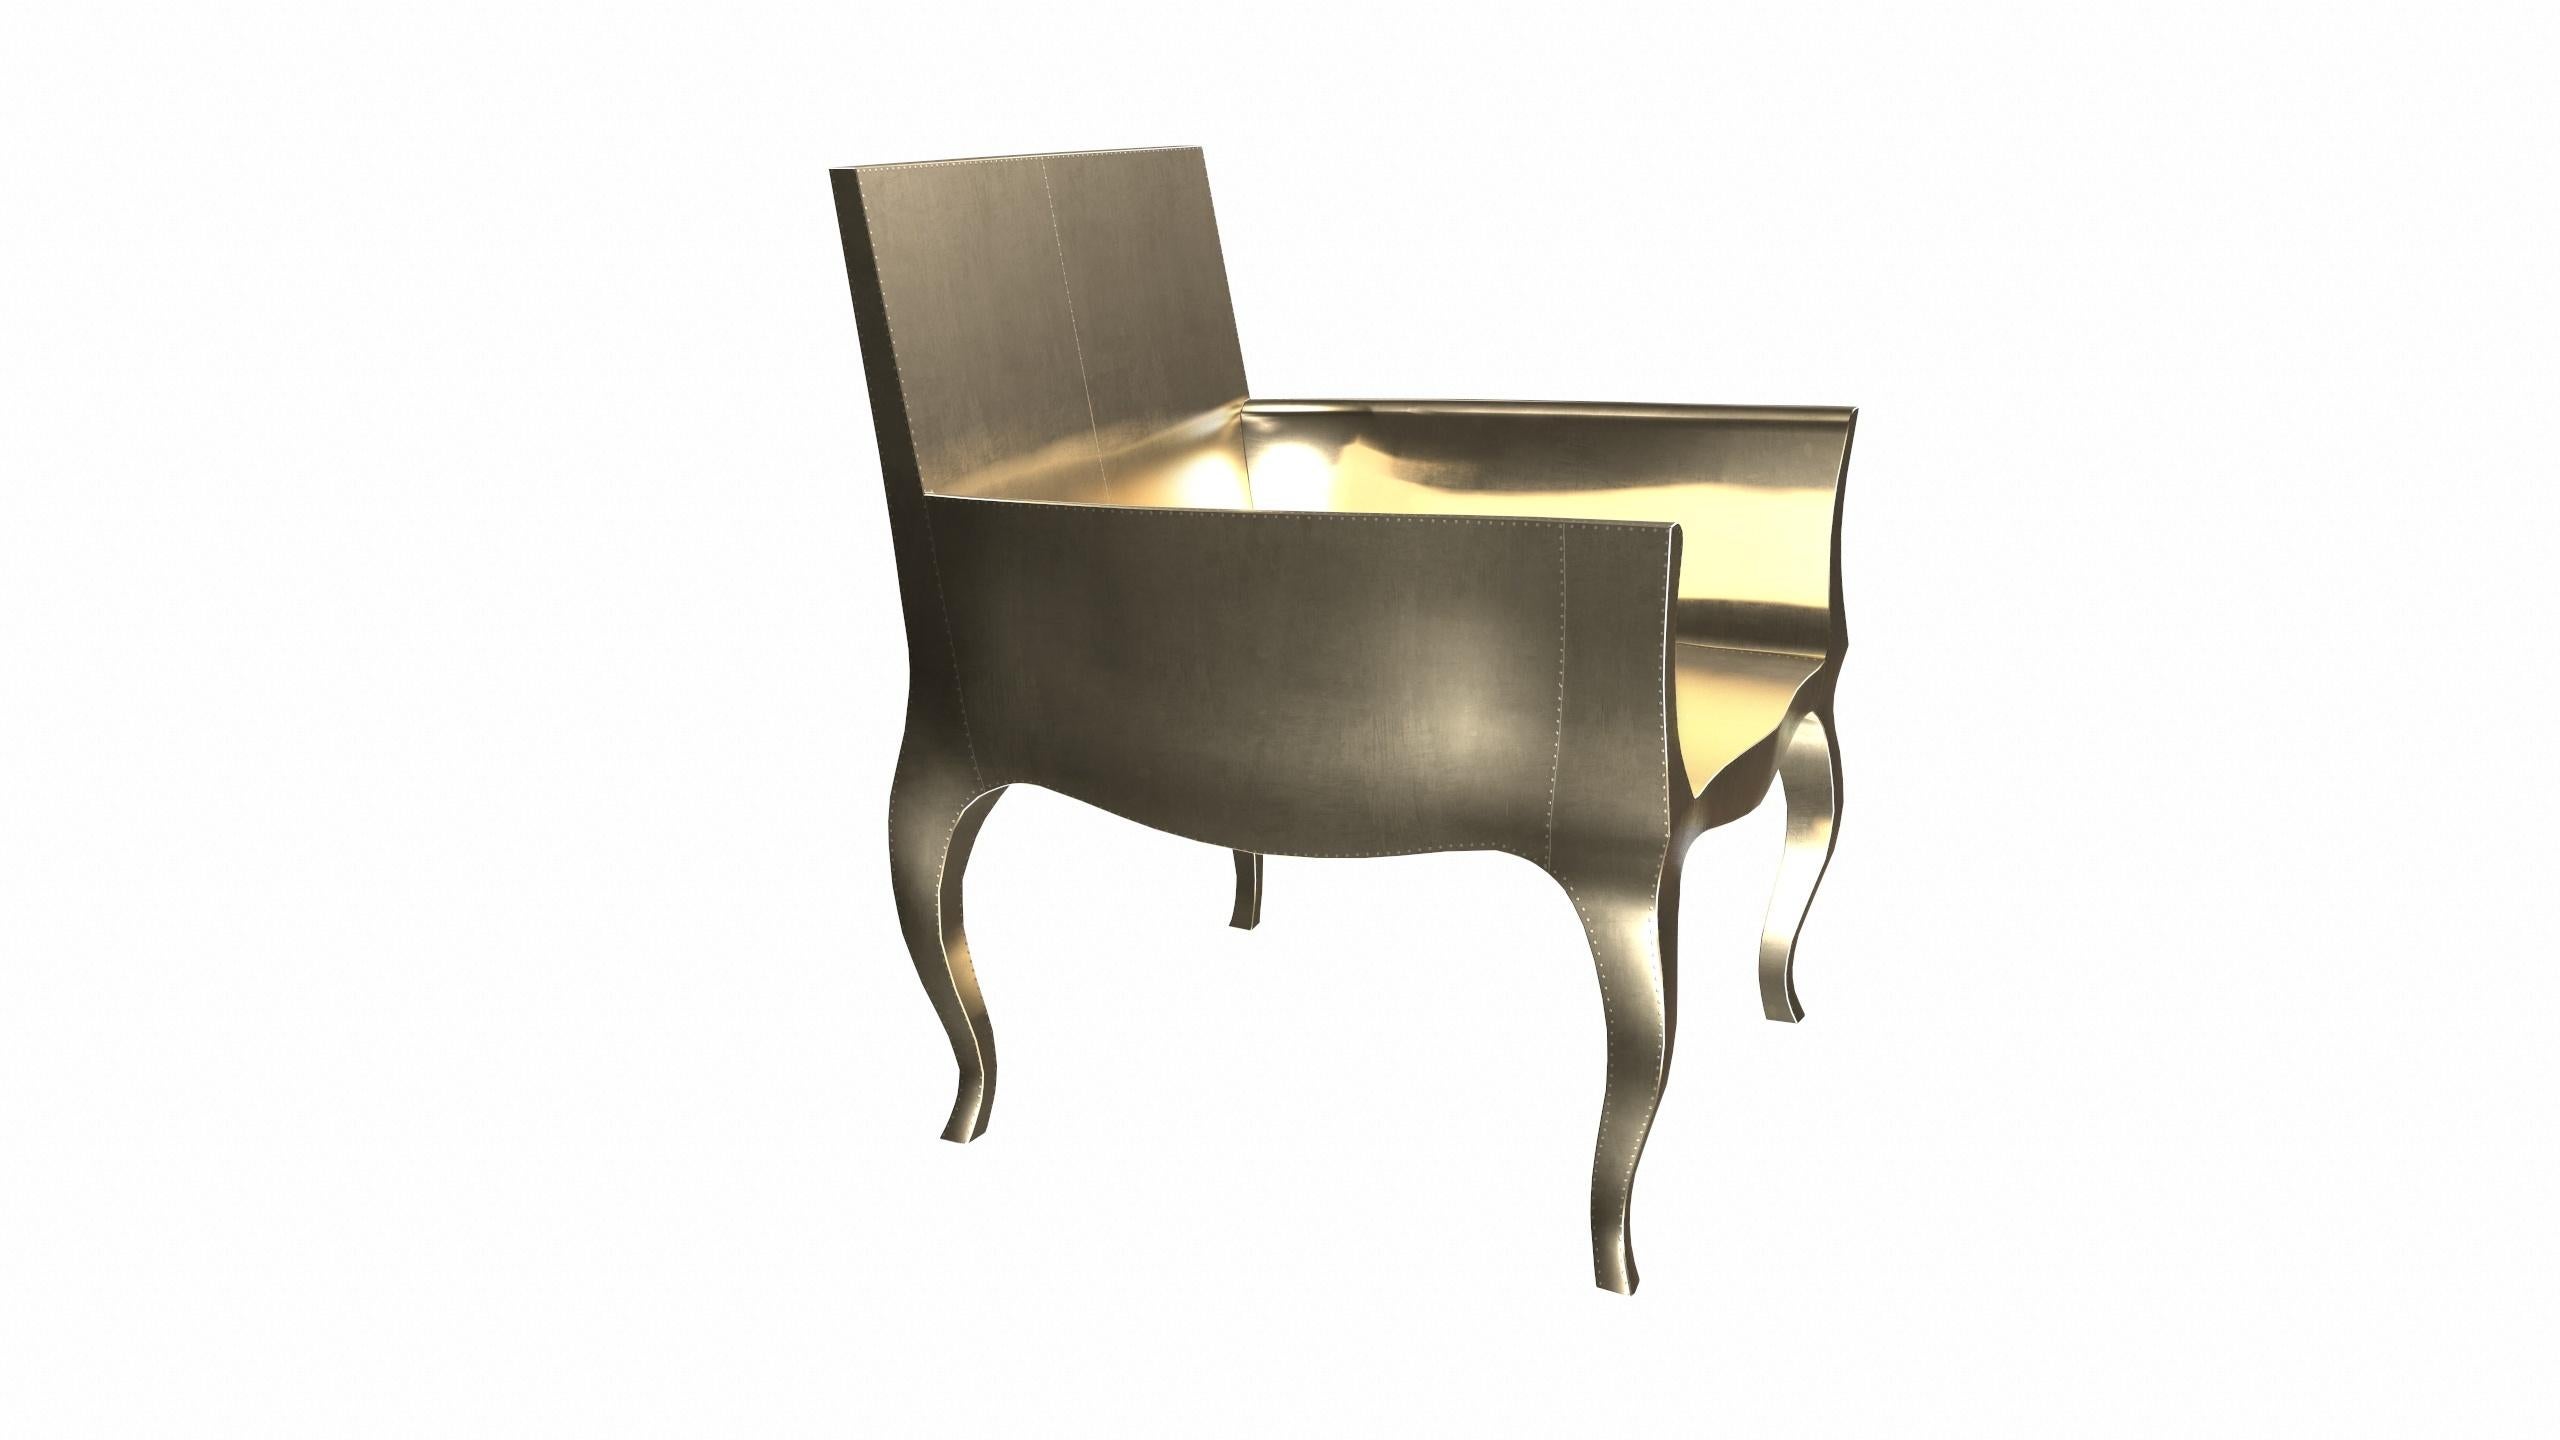 Contemporary Art Deco Lounge Chair in Smooth Brass by Paul Mathieu for S. Odegard For Sale